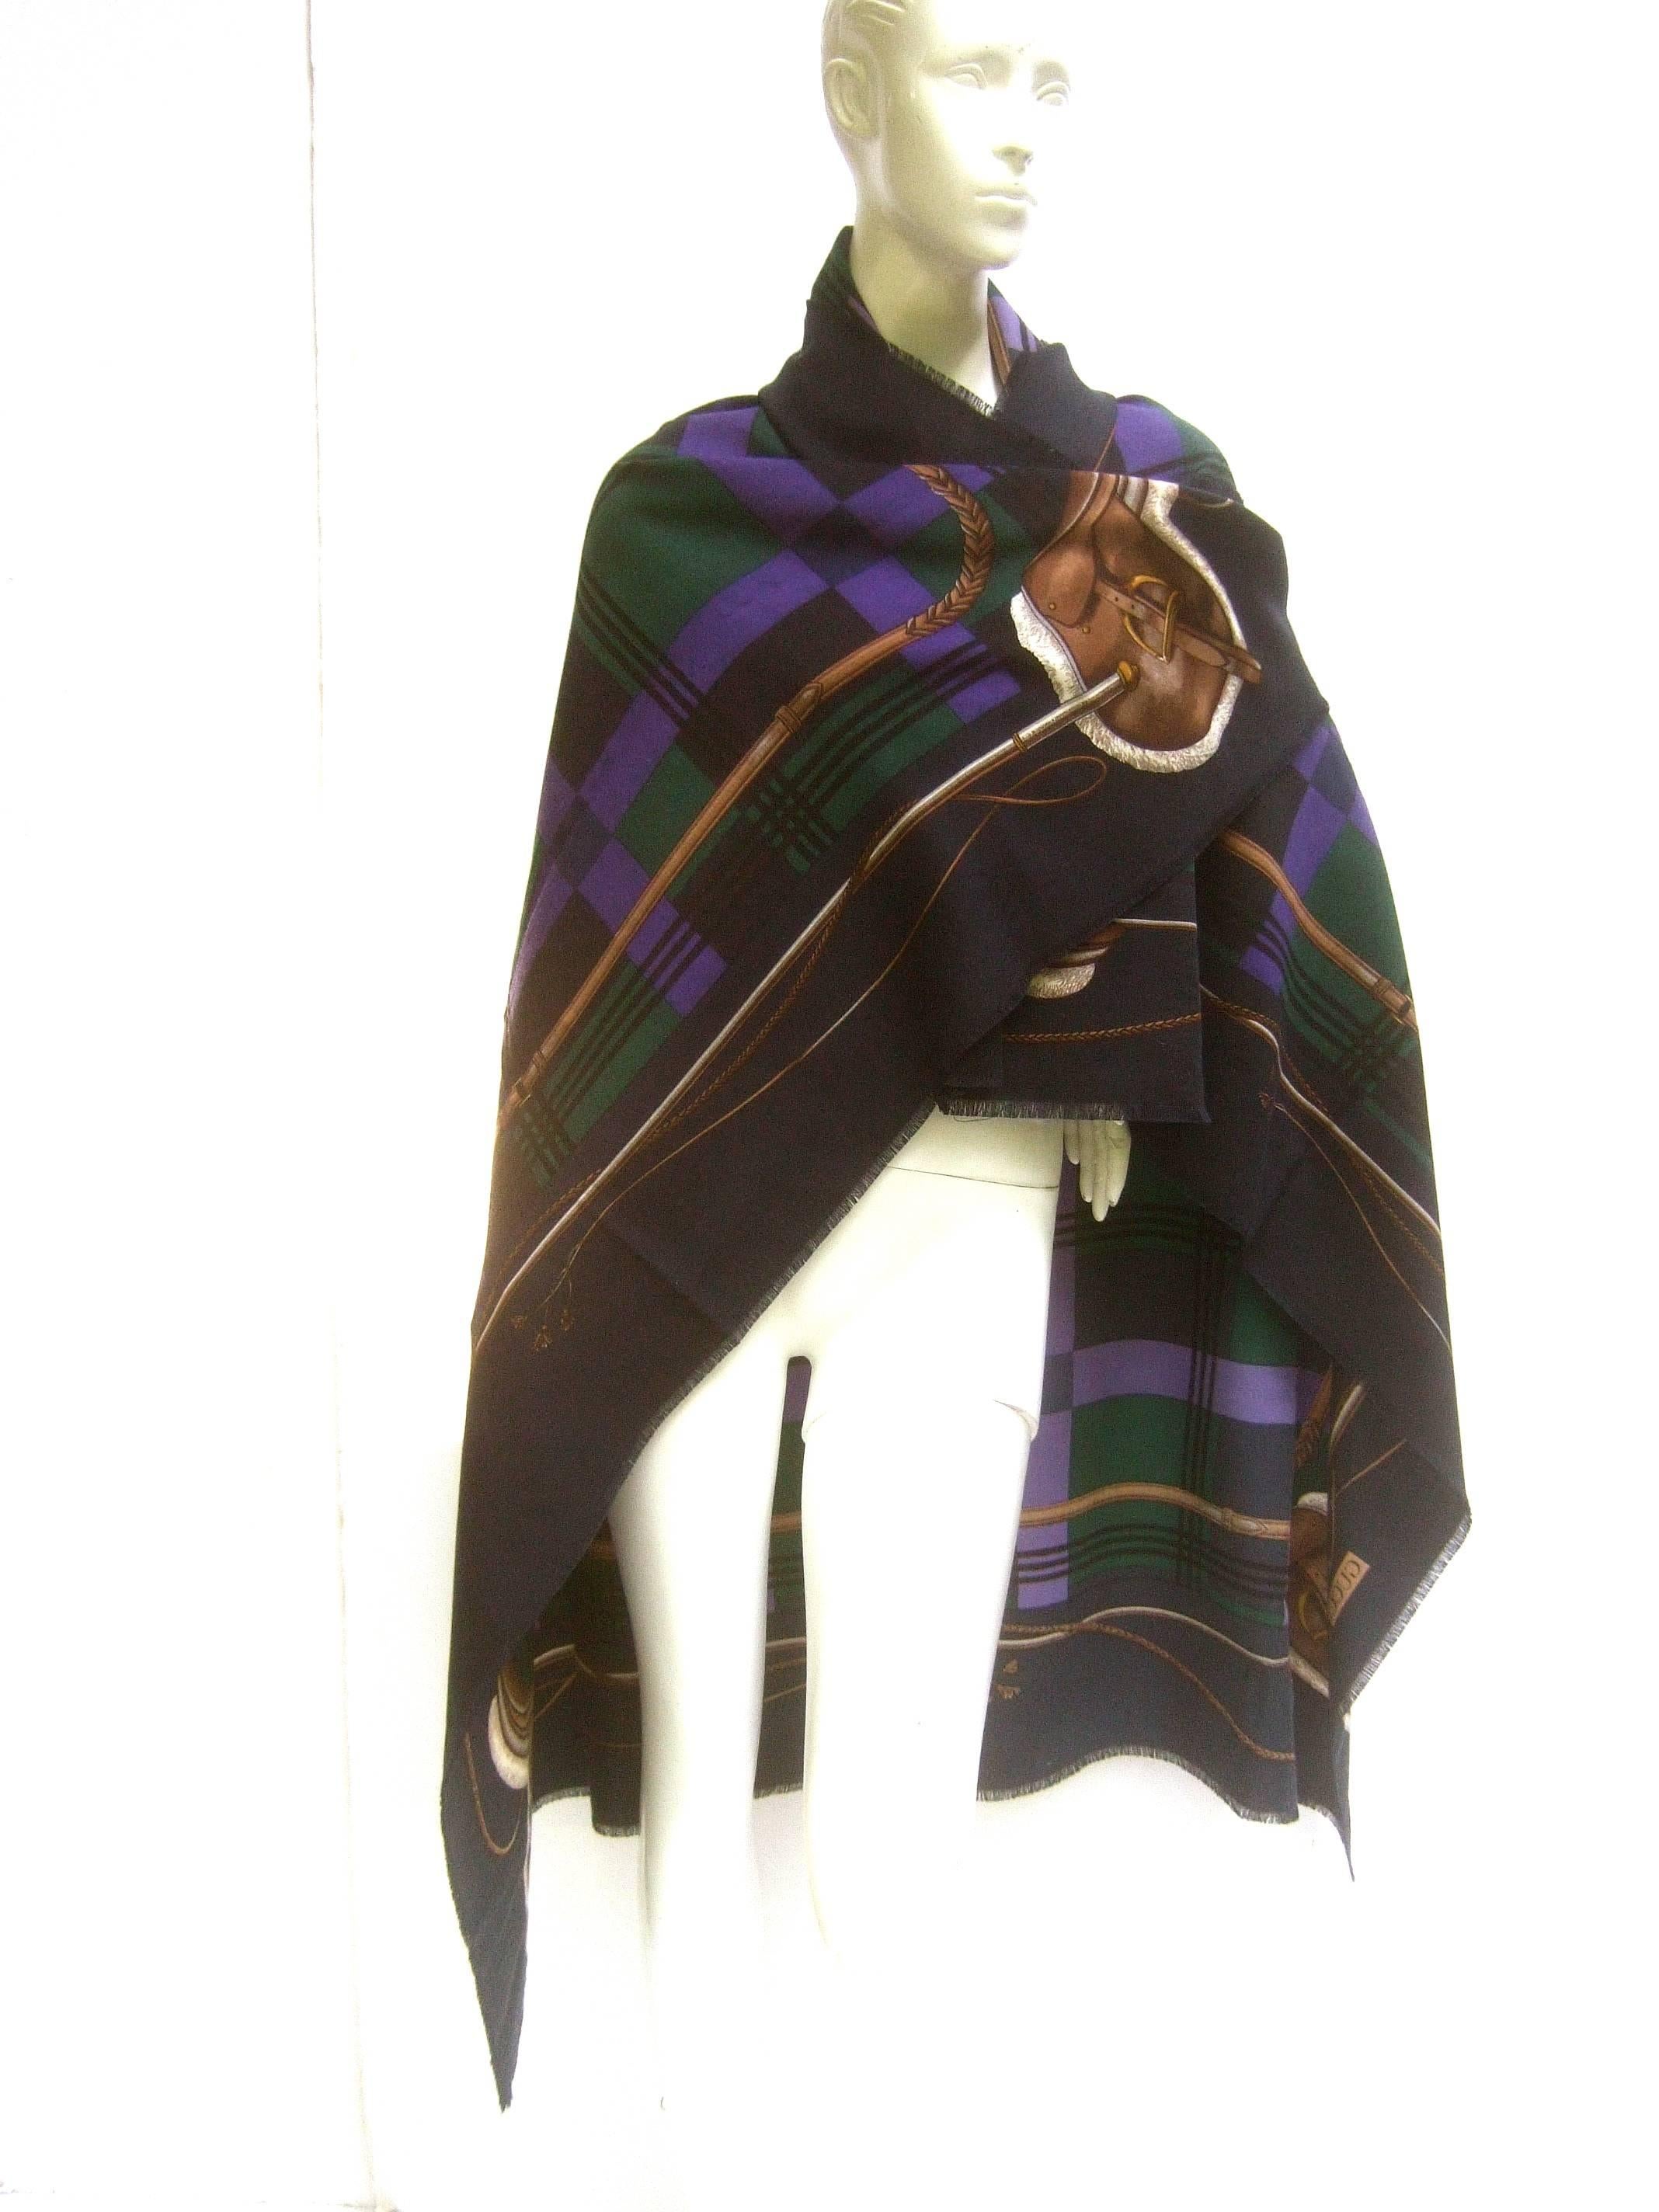 Gucci Italy Massive Equestrian Theme Wool Shawl - Scarf c 1990s 52 x 52 In Good Condition For Sale In University City, MO